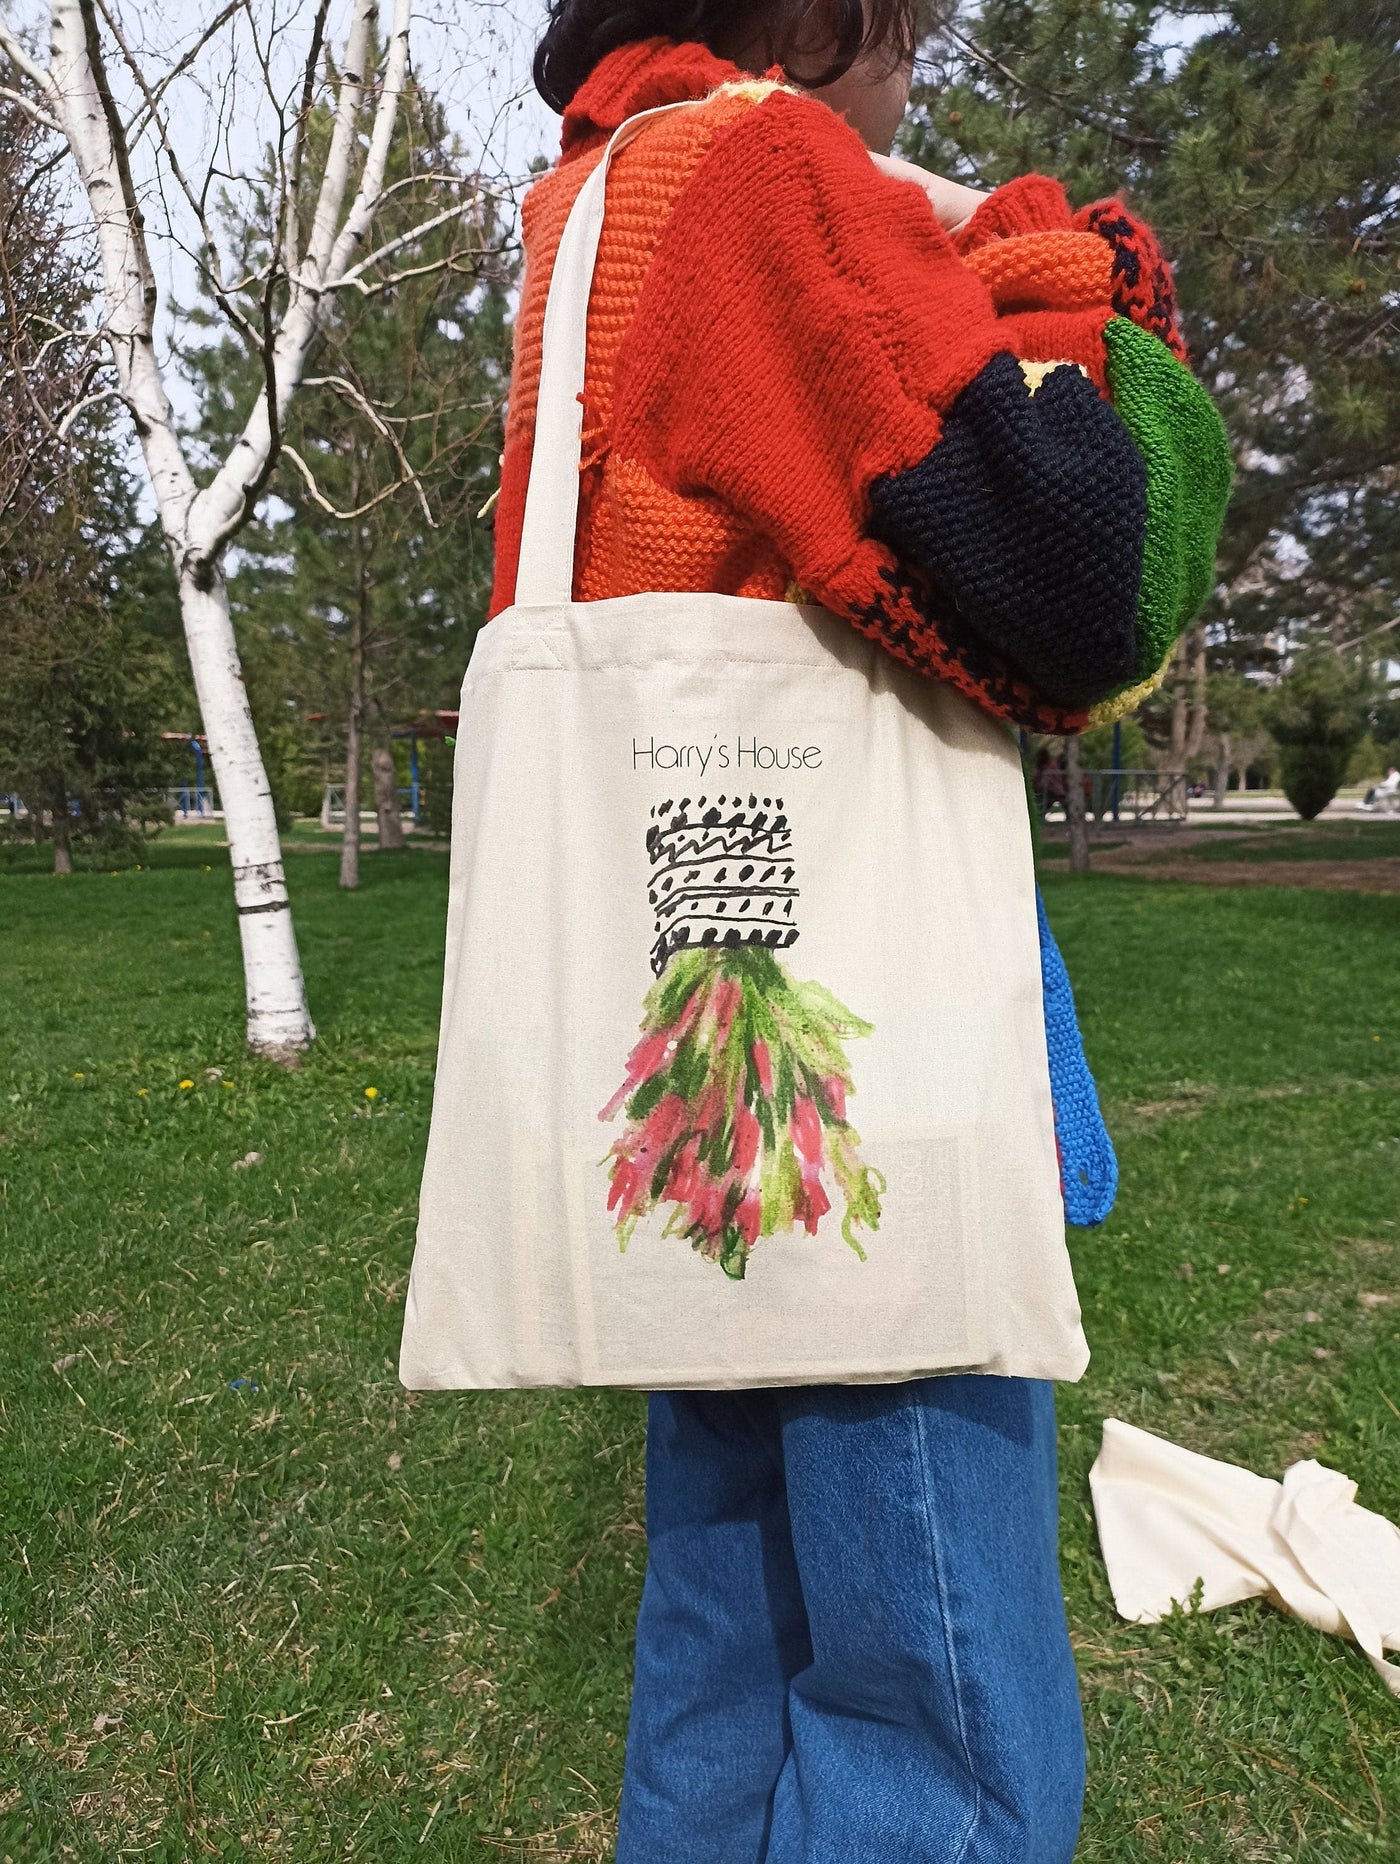 Harry's House Tote Bag, Harry Styles Flower Tote Bag, Harry Styles Merch, Harry Styles Love On Tour Tote Bag, As it Was